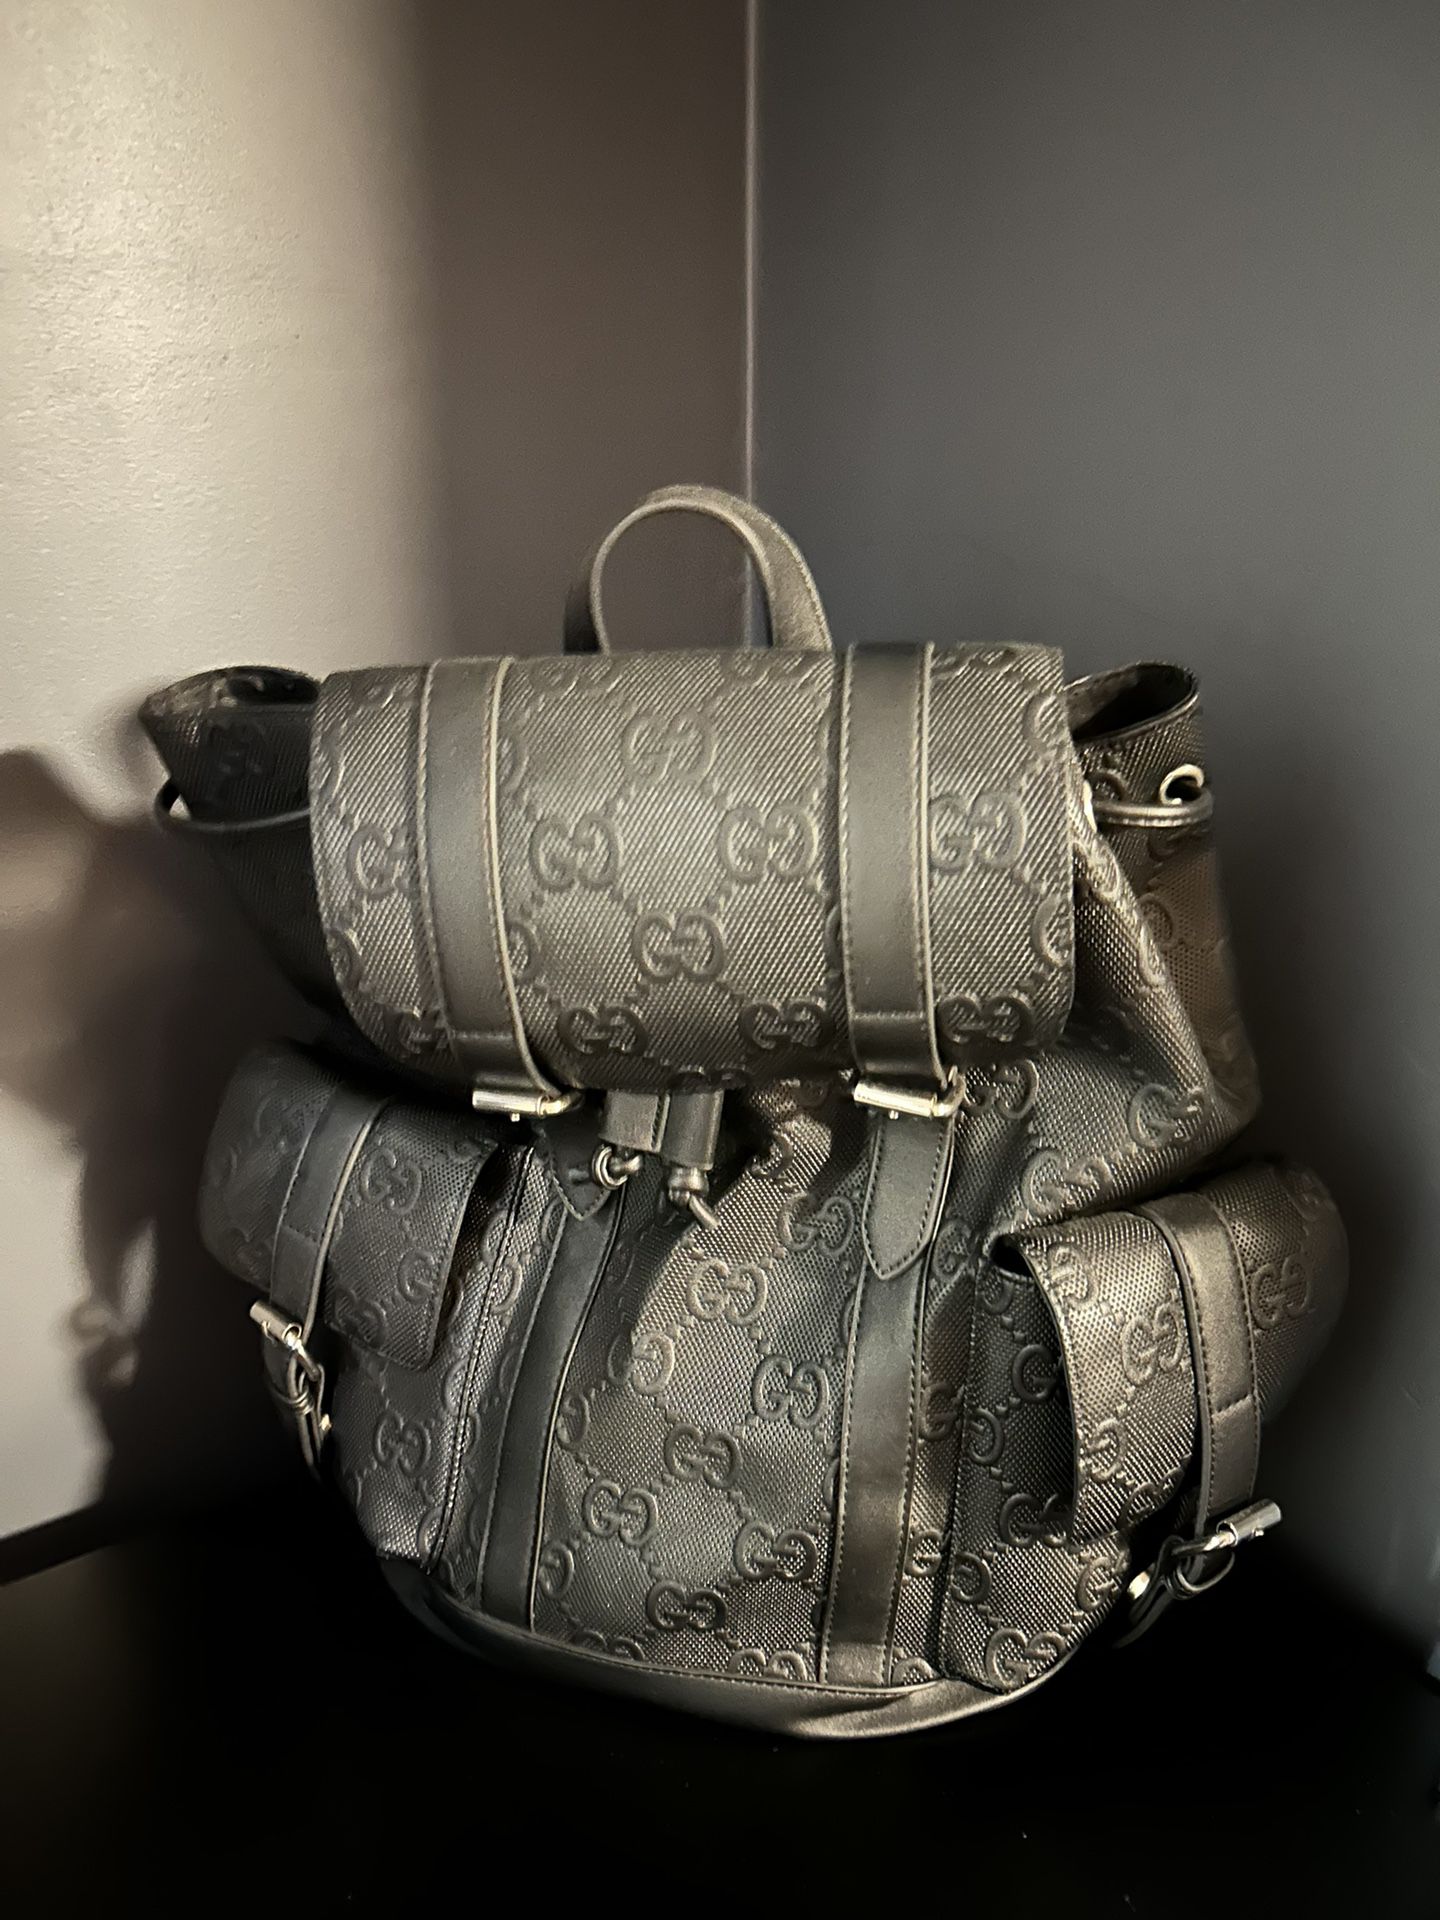 Gucci Backpack for Sale in San Diego, CA - OfferUp